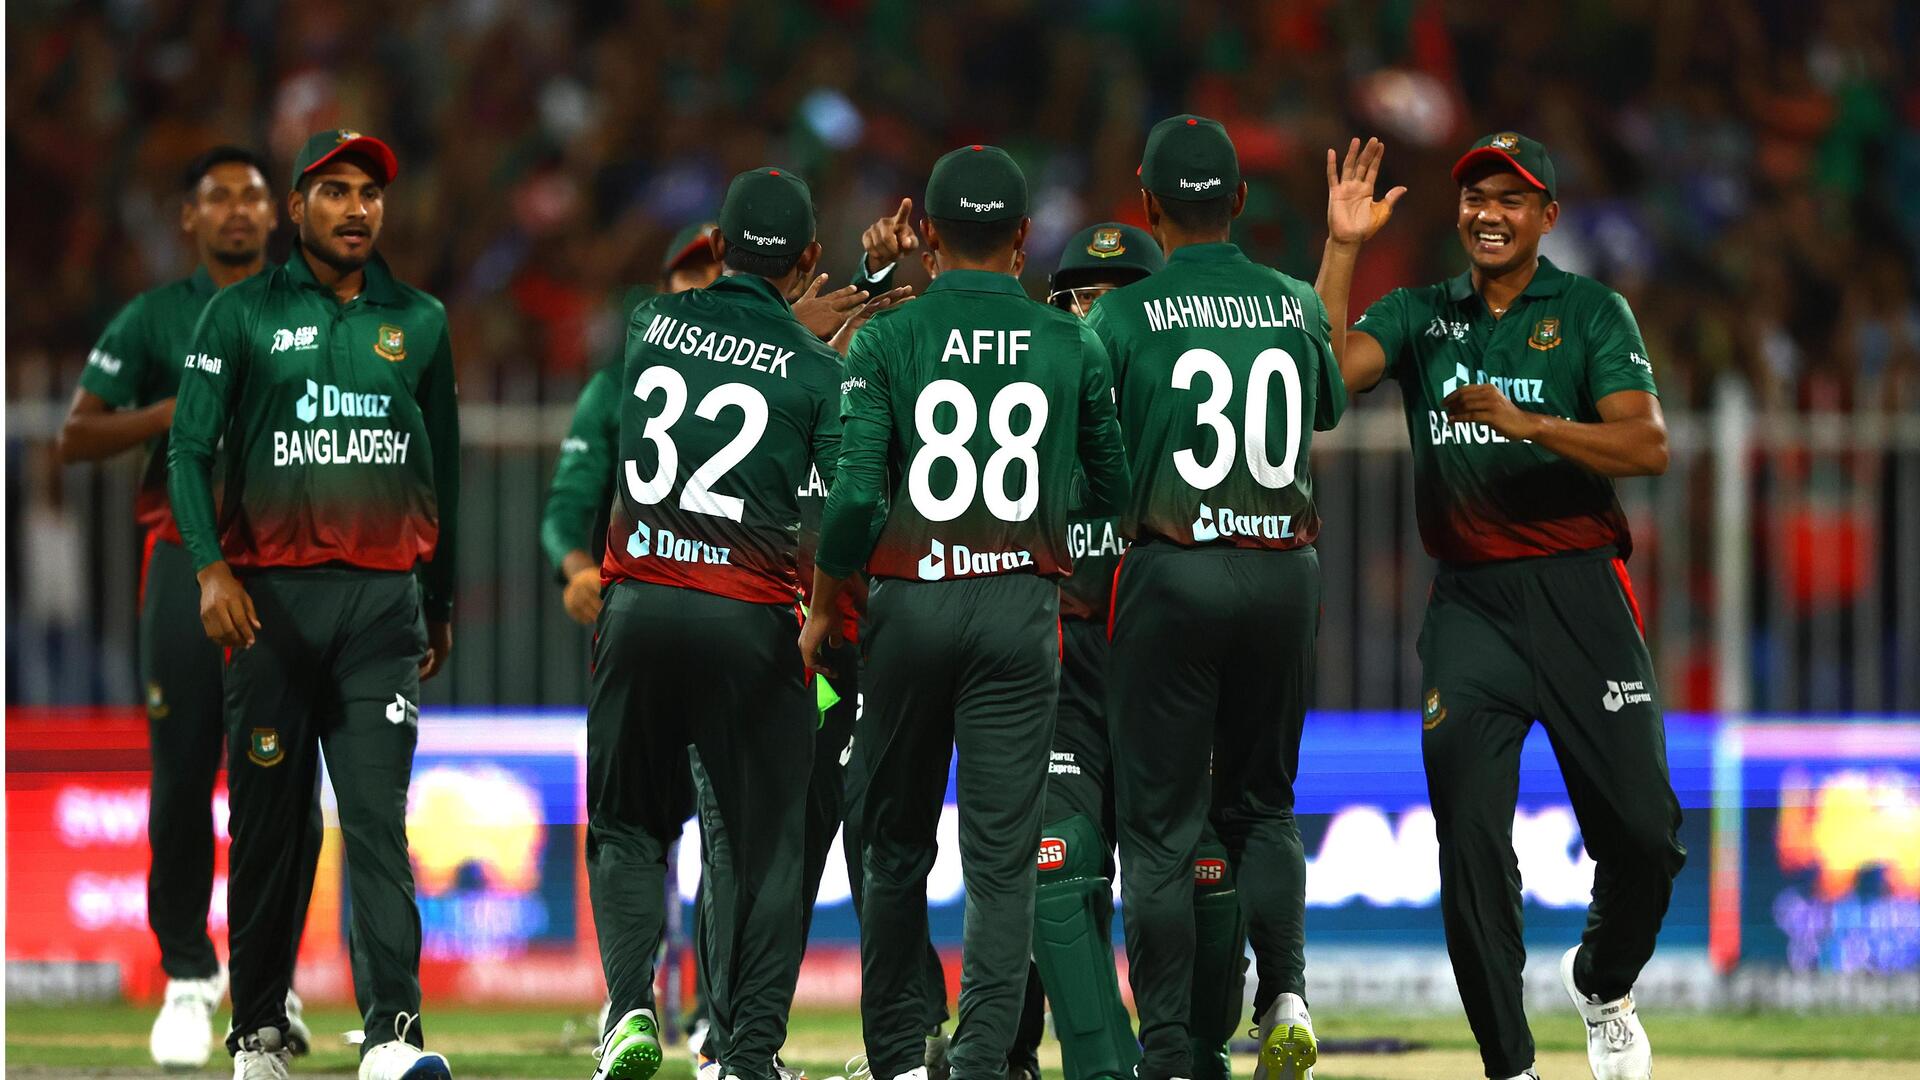 Bangladesh vs New Zealand ODIs: Here is the statistical preview